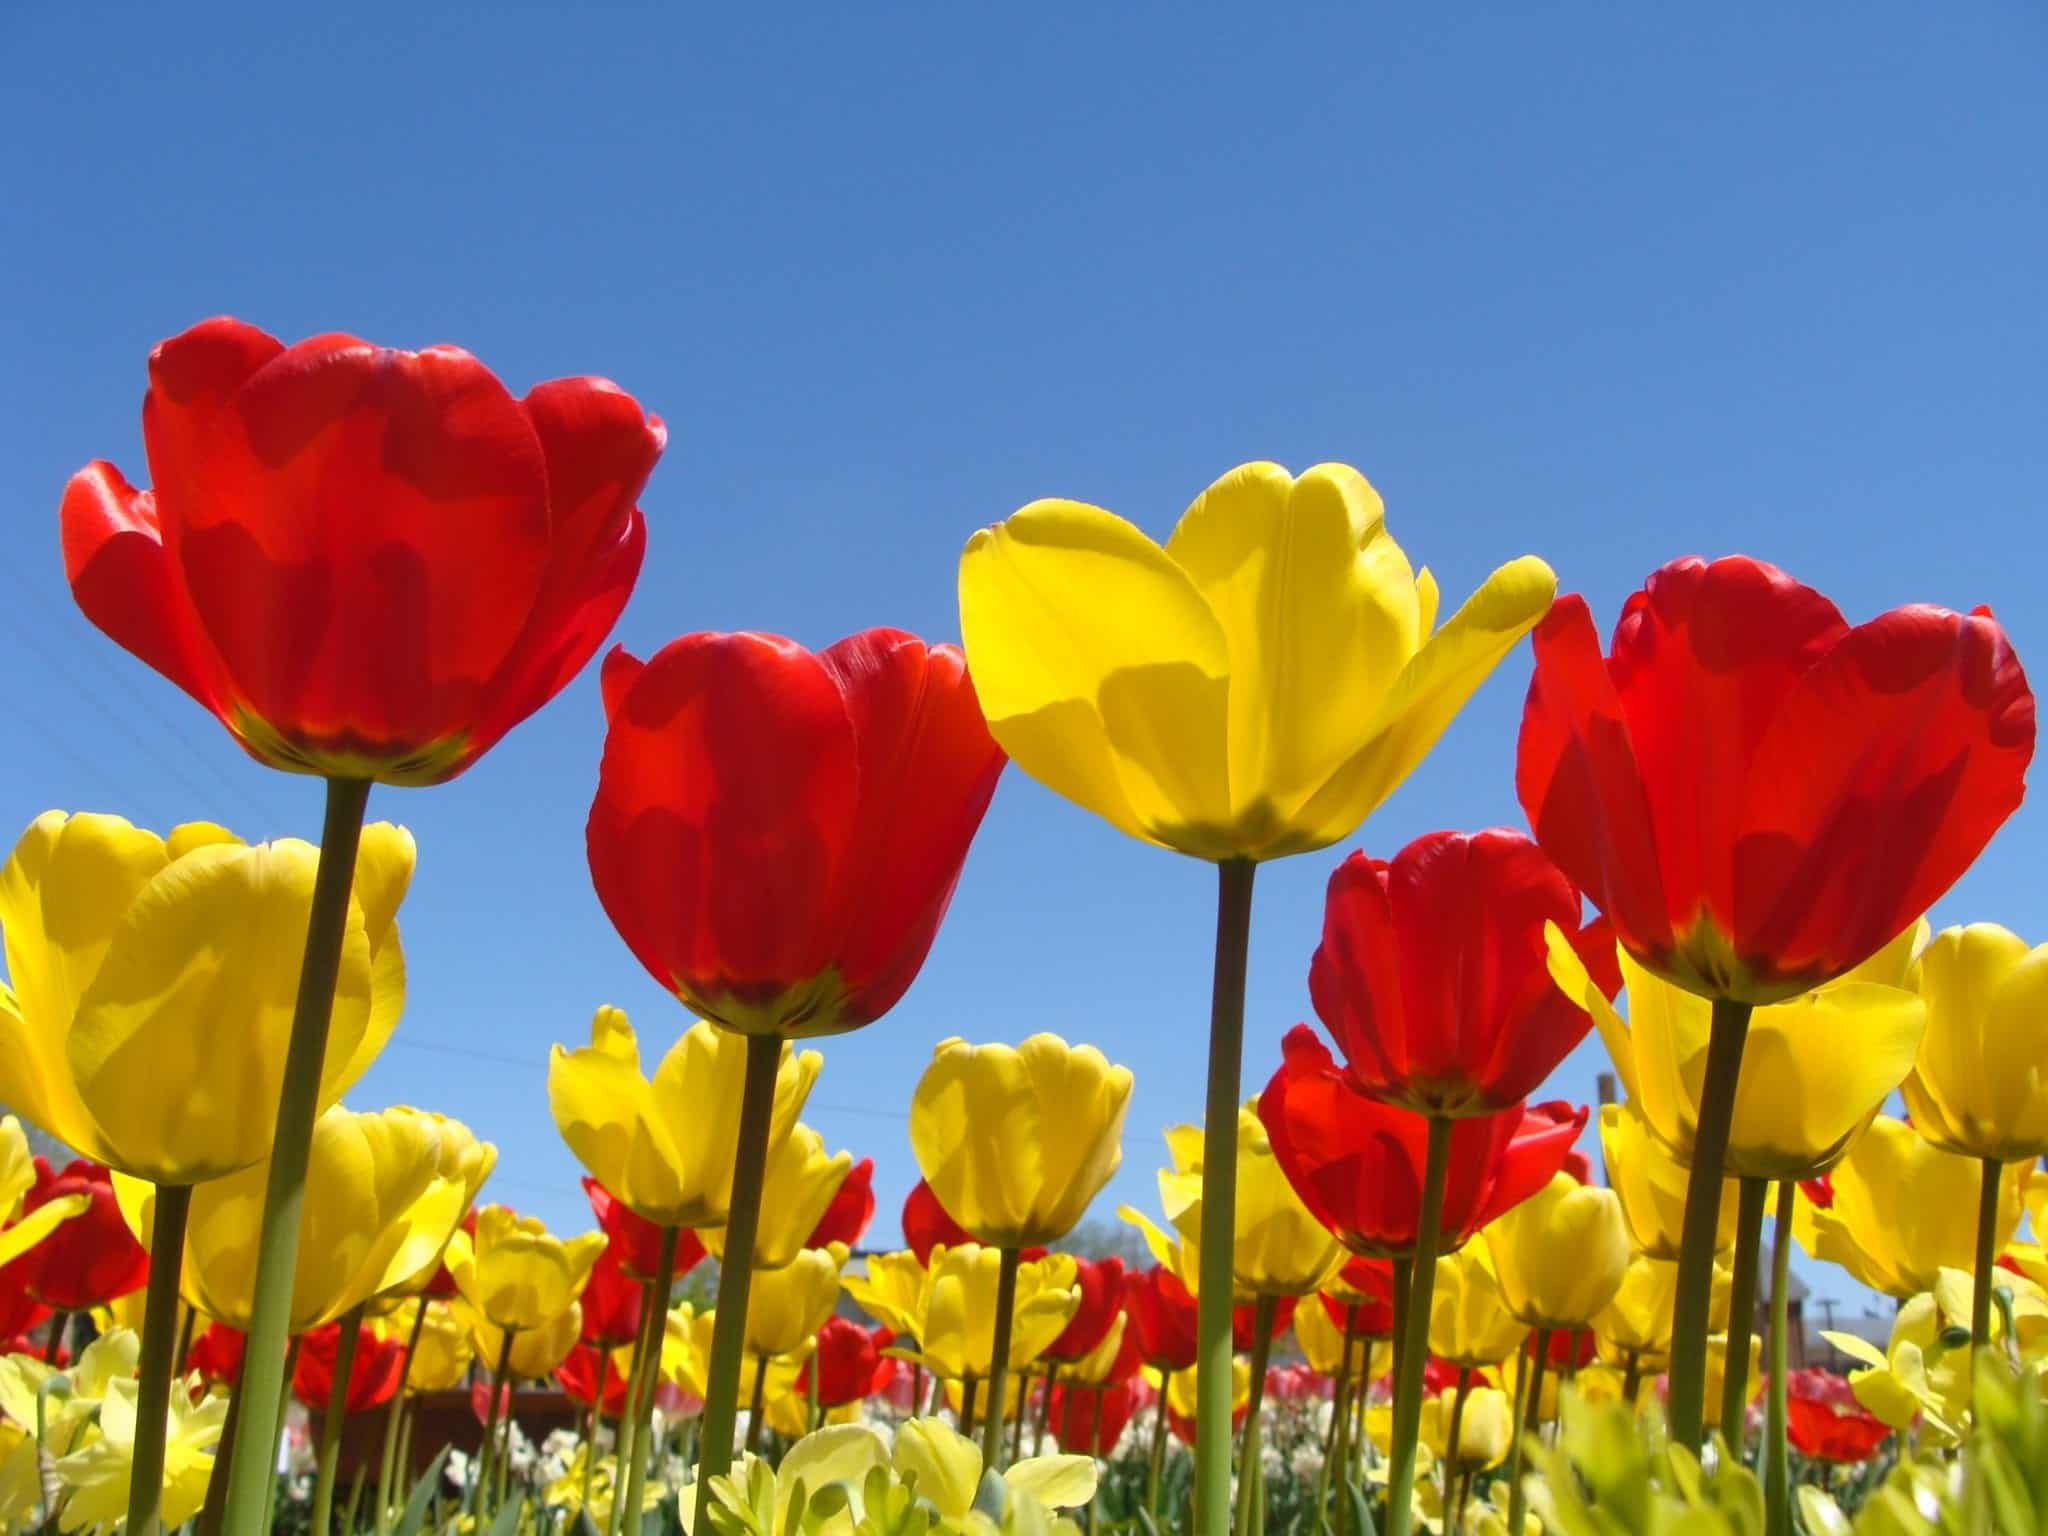 Red and yellow tulips against blue skies